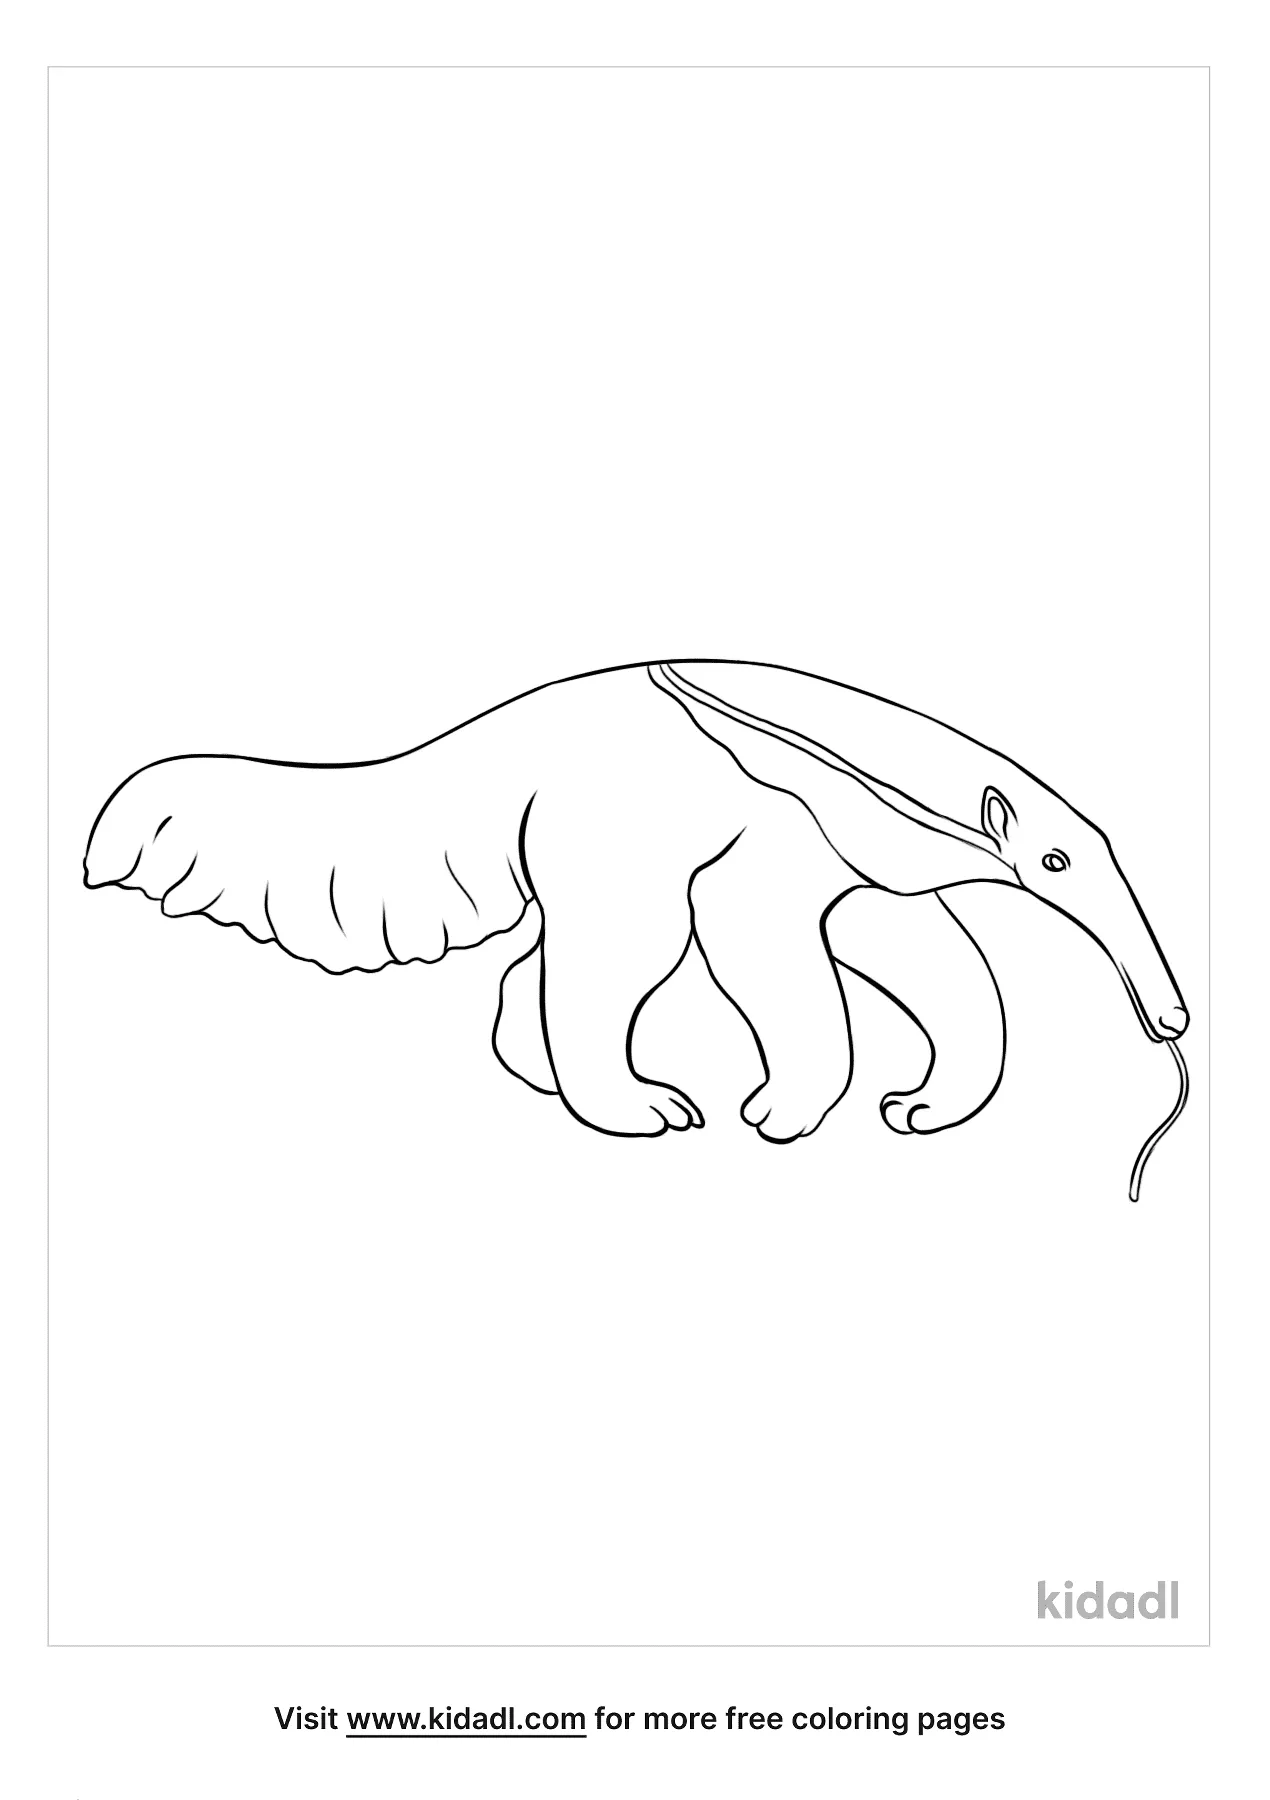 Anteater Coloring Pages   Free Mammals Coloring Pages   Kidadl